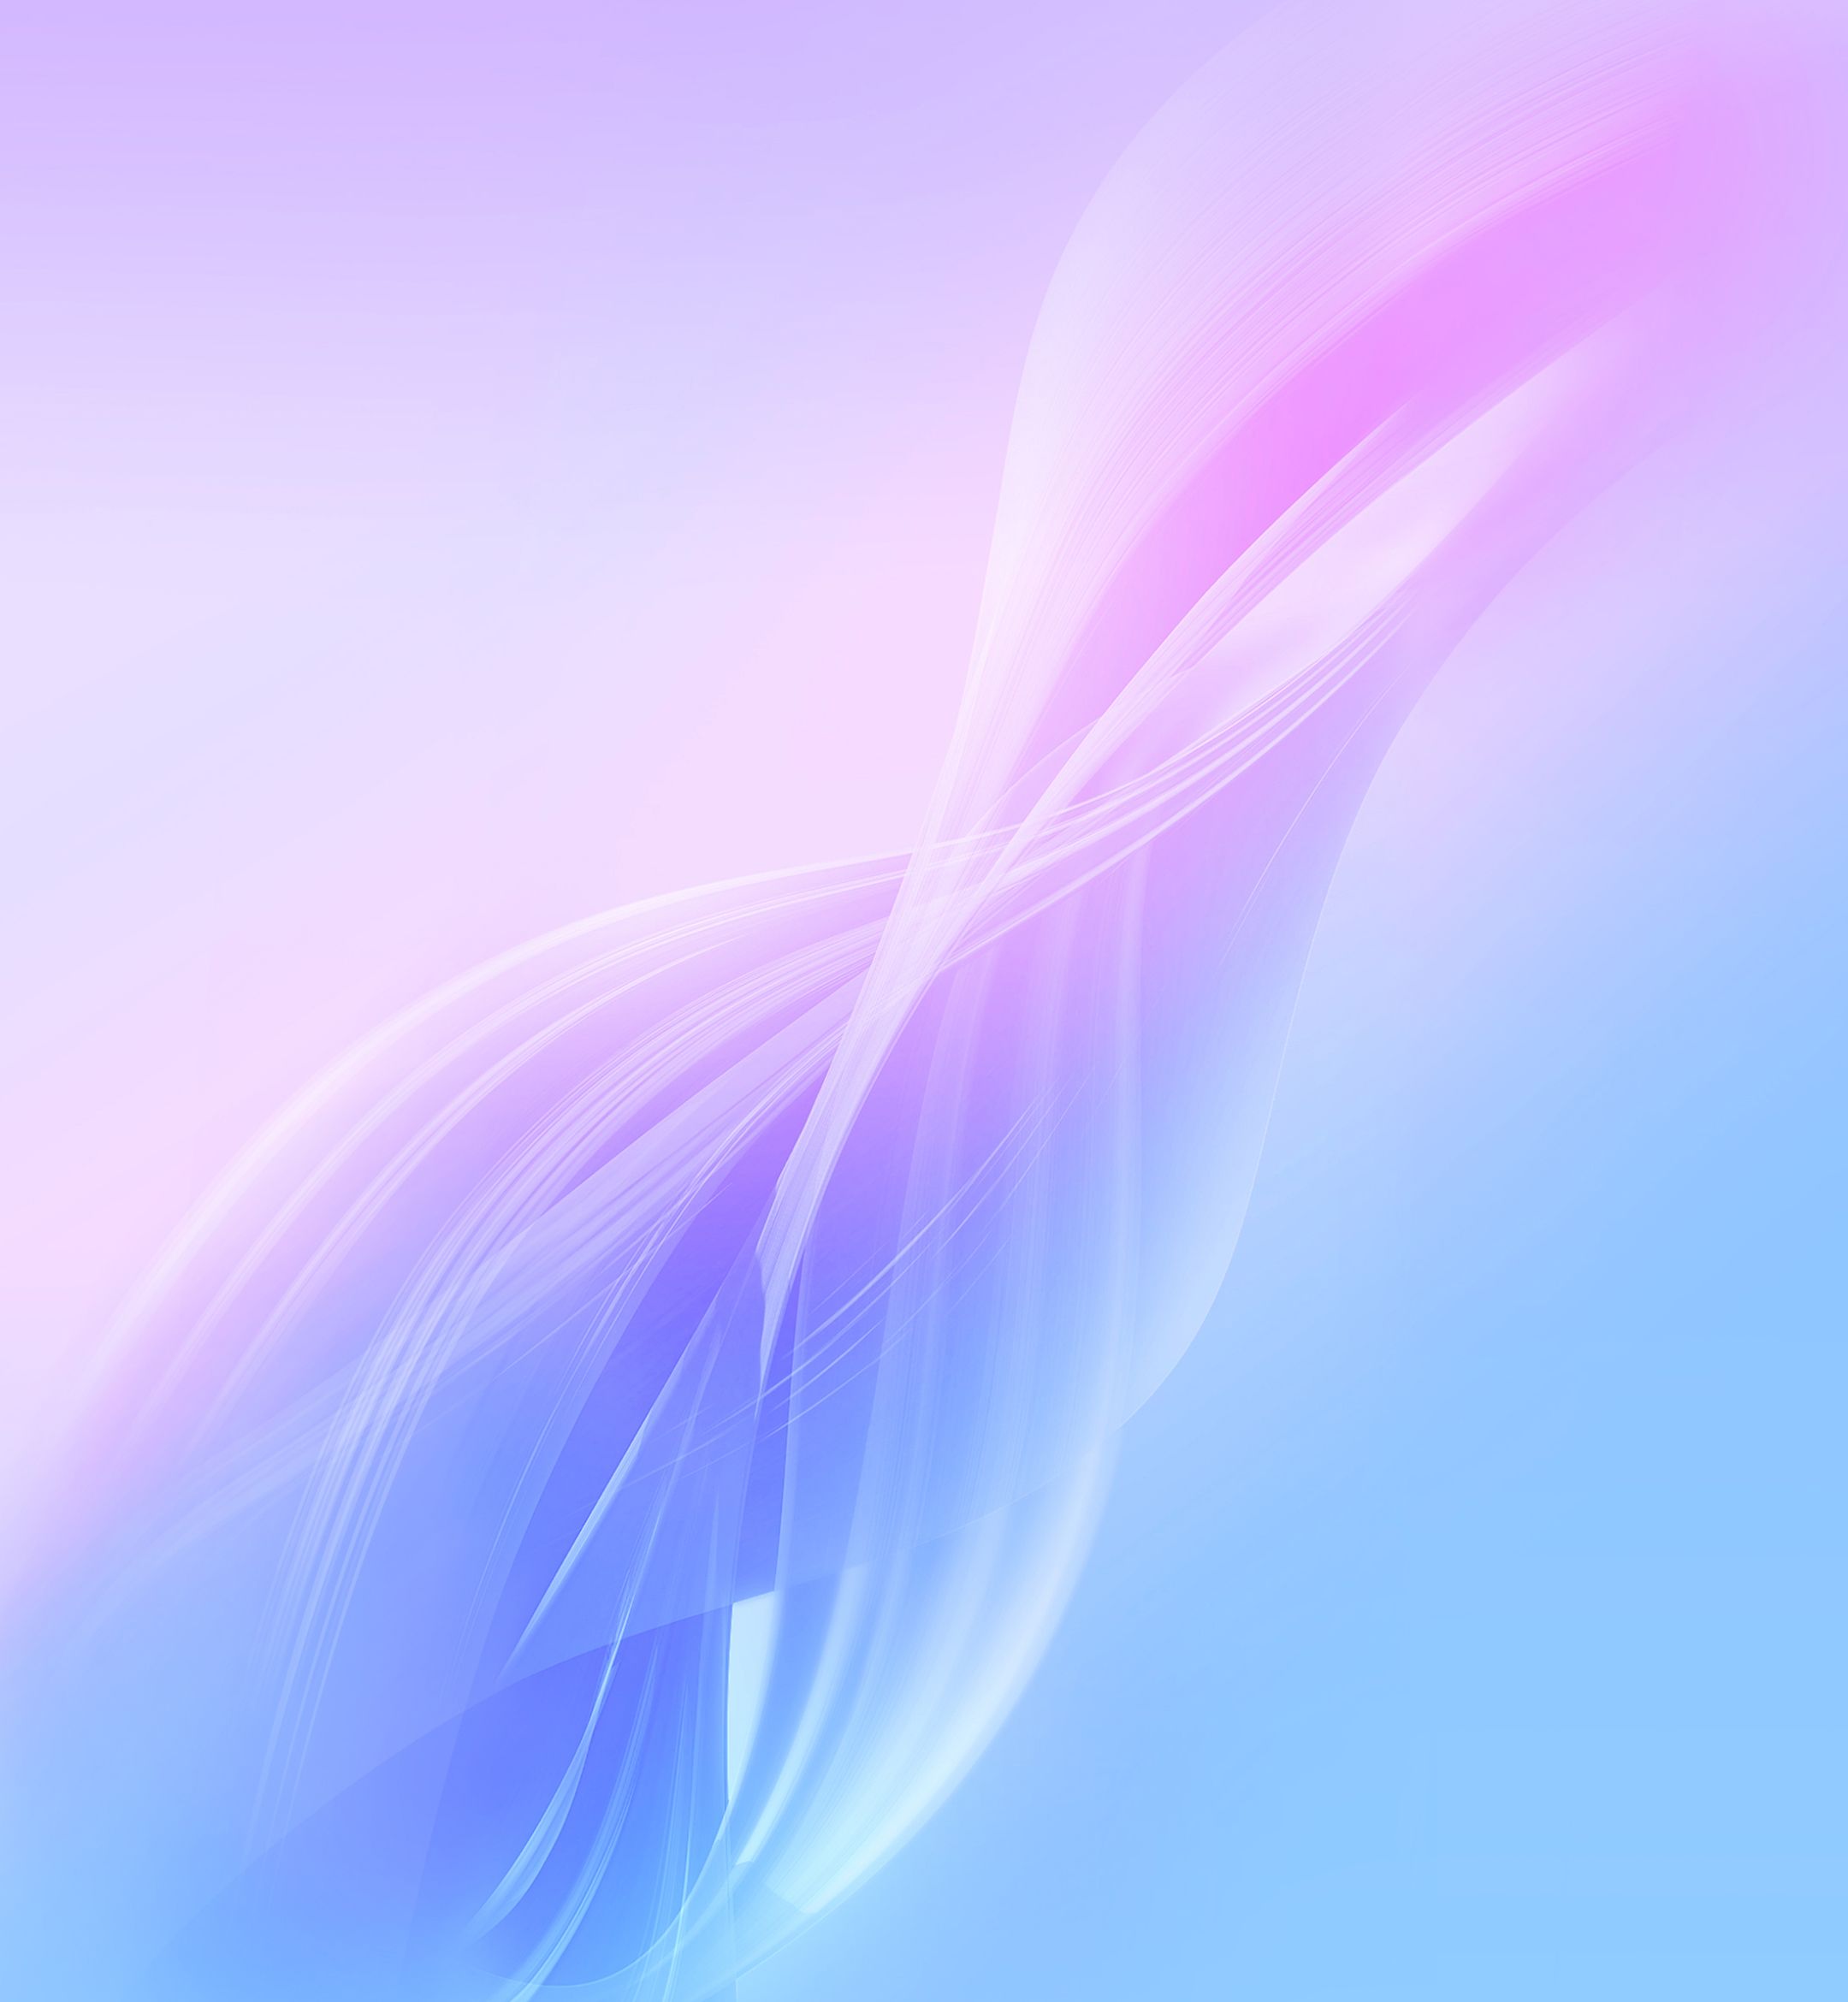 Honor 8X Wallpapers